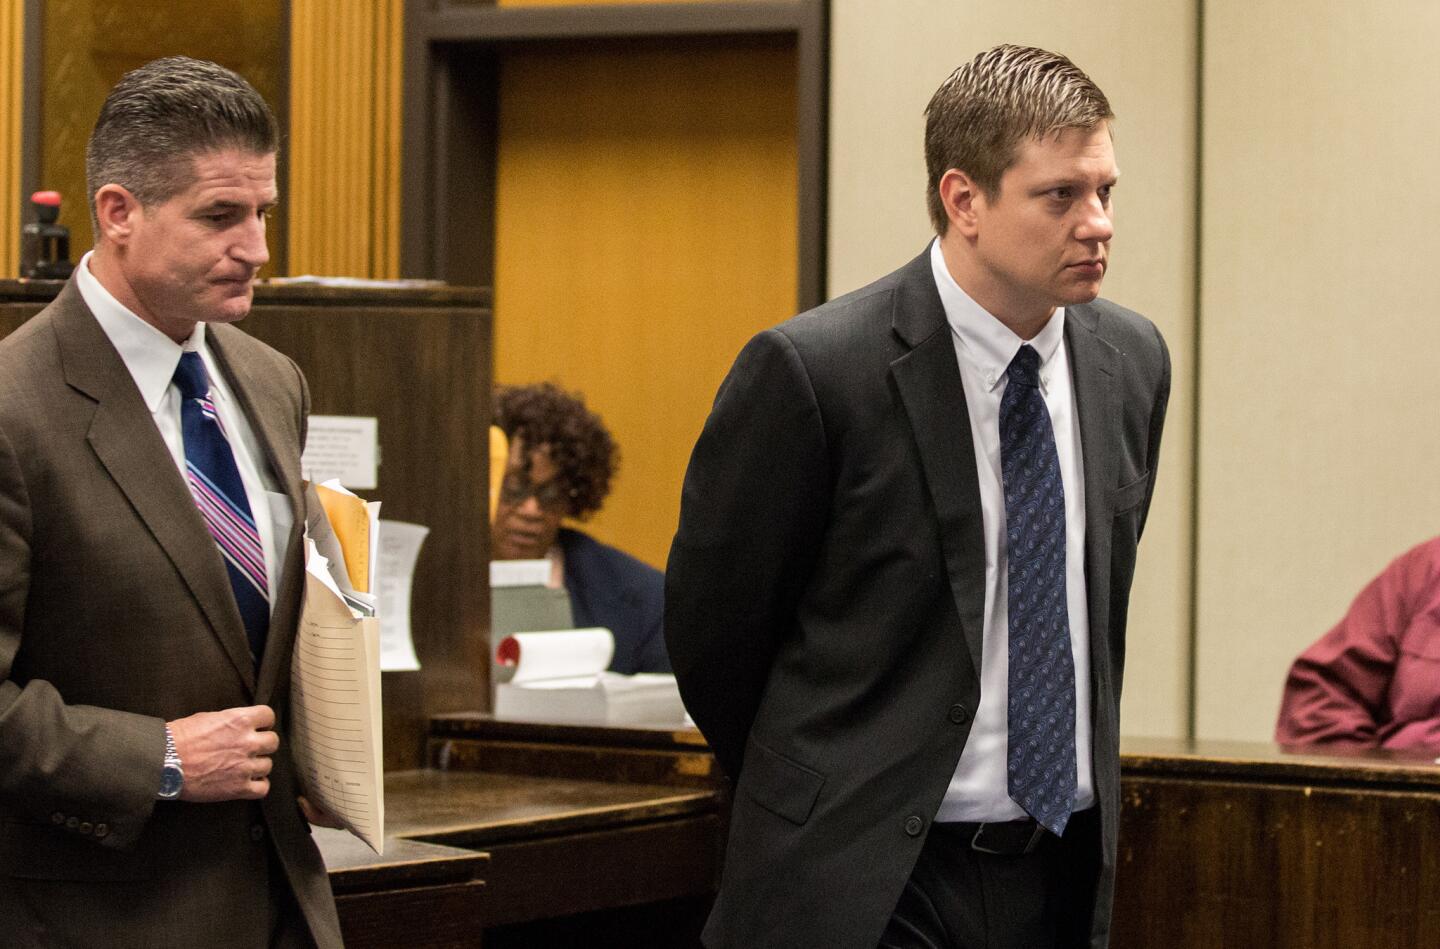 Chicago police Officer Jason Van Dyke, right, attends a court hearing with his attorney, Daniel Herbert, on Dec. 18, 2015, at the Leighton Criminal Court Building in Chicago. Van Dyke is charged with first-degree murder in the 2014 fatal shooting of Laquan McDonald, 17, while Van Dyke was on duty.